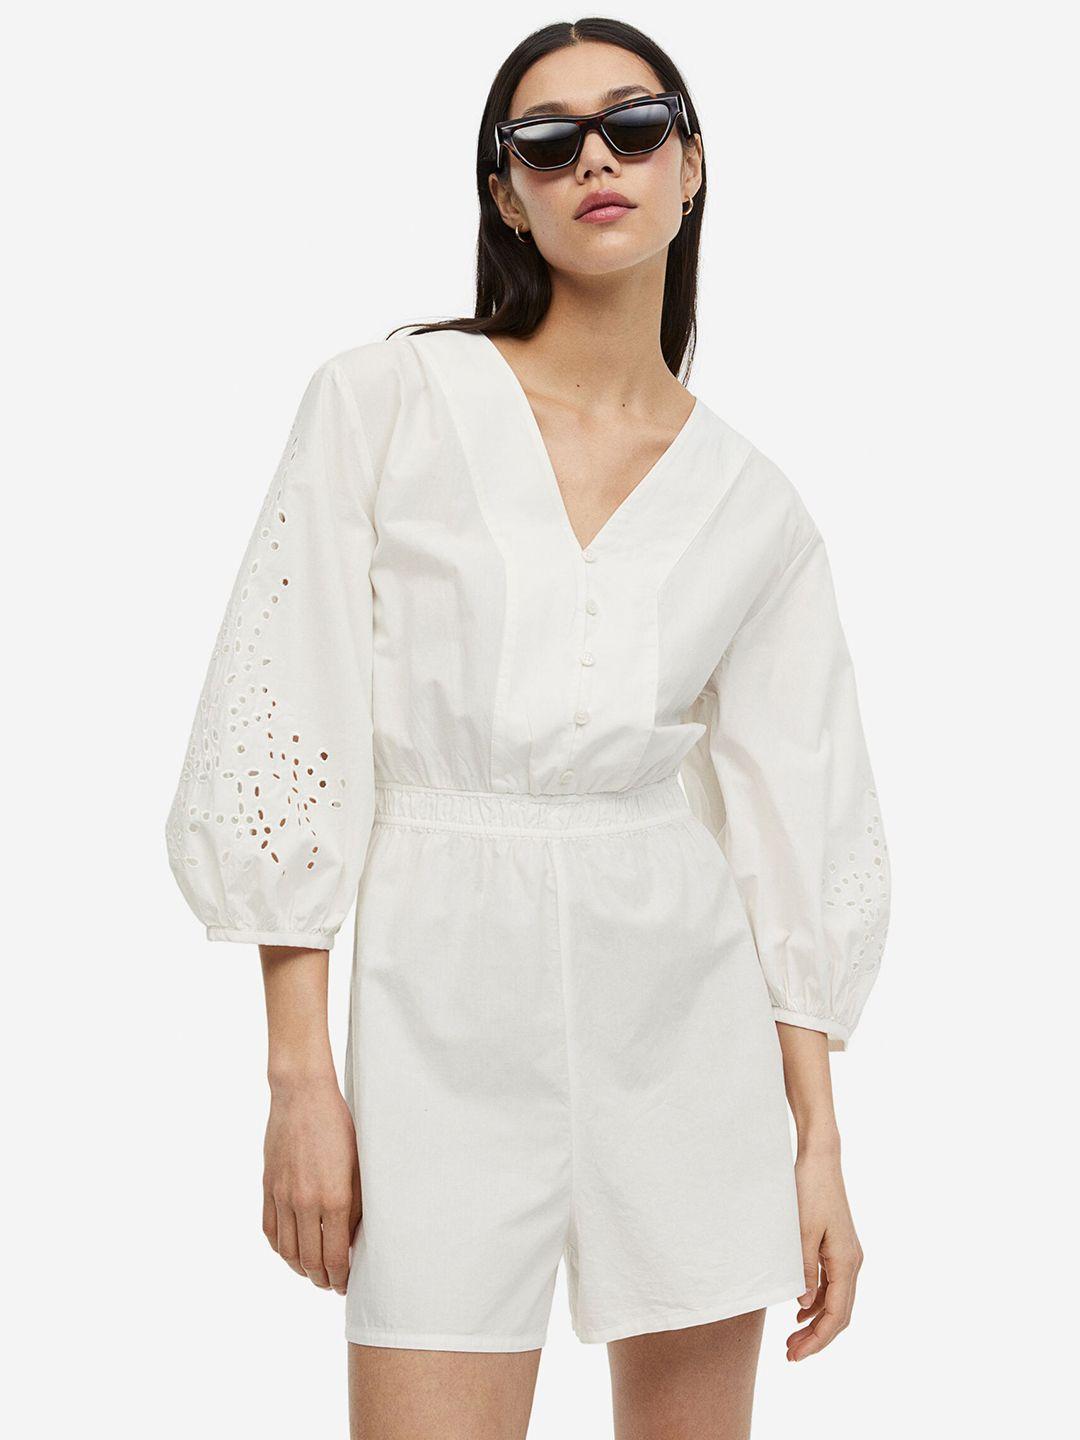 h&m pure cotton broderie anglaise playsuit